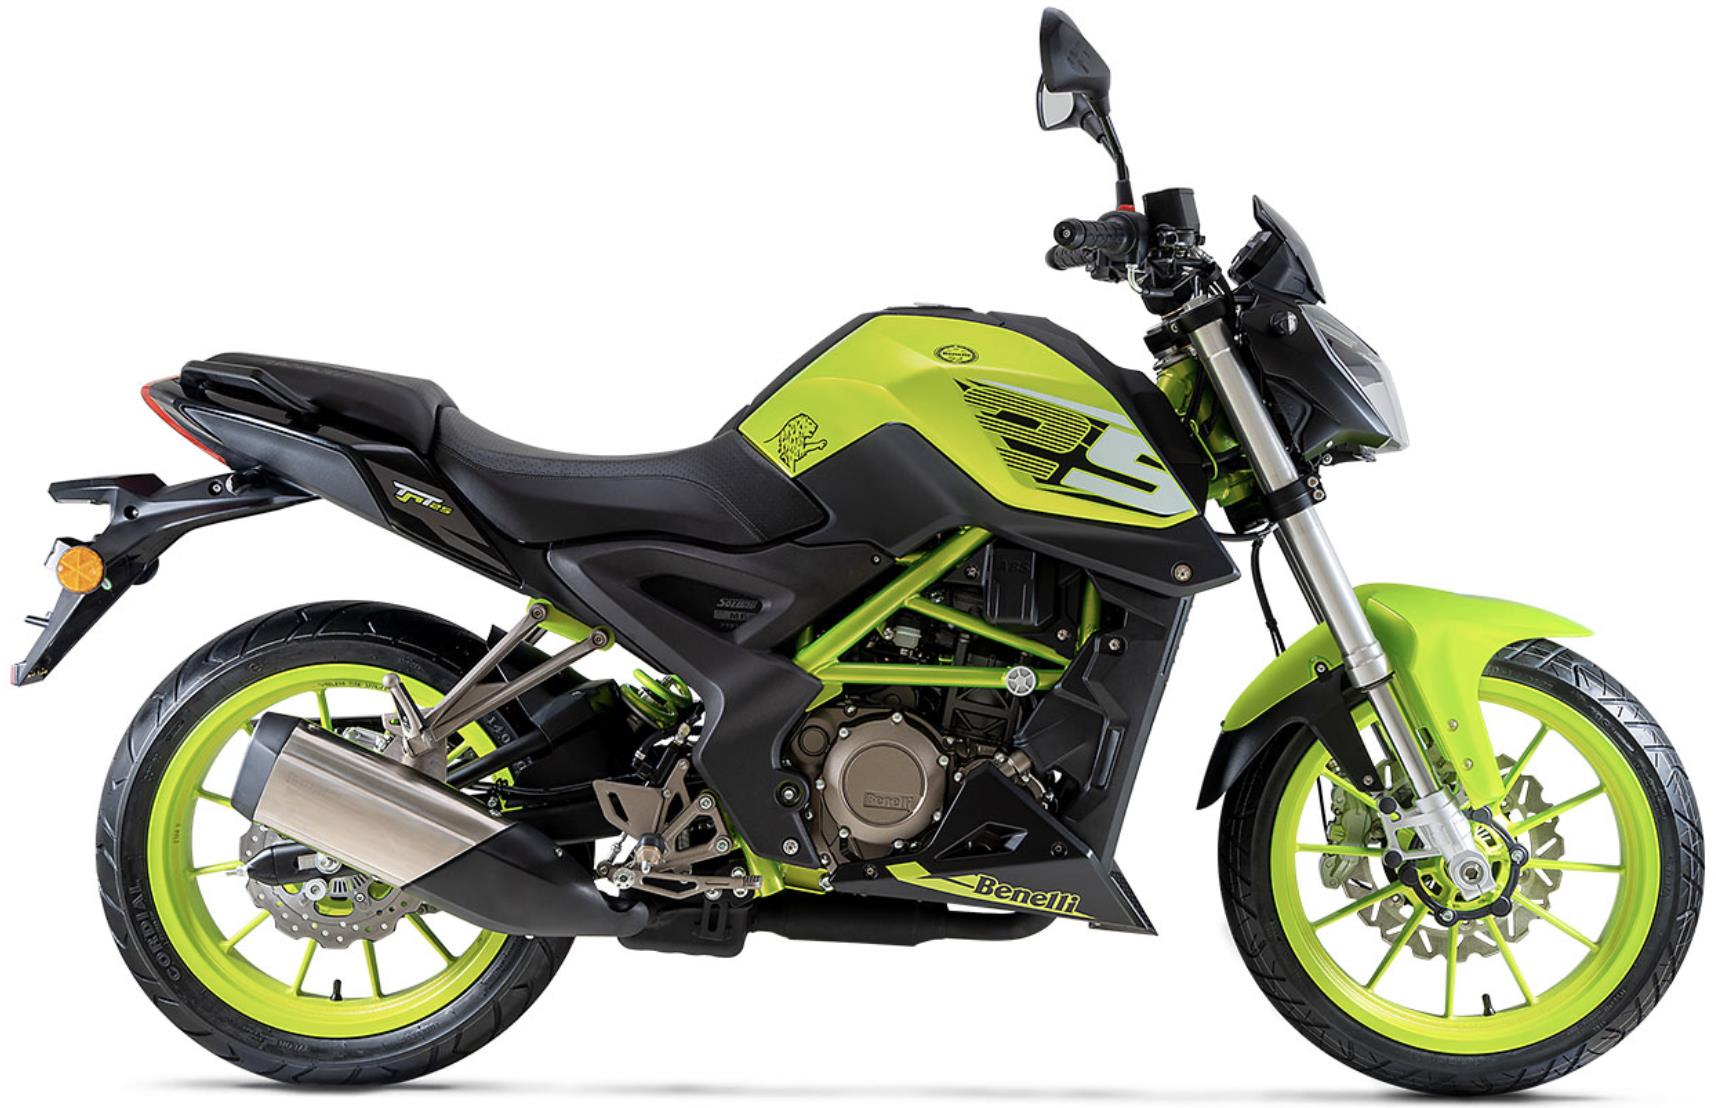 Benelli TNT 250 Specifications and Expected Price in India